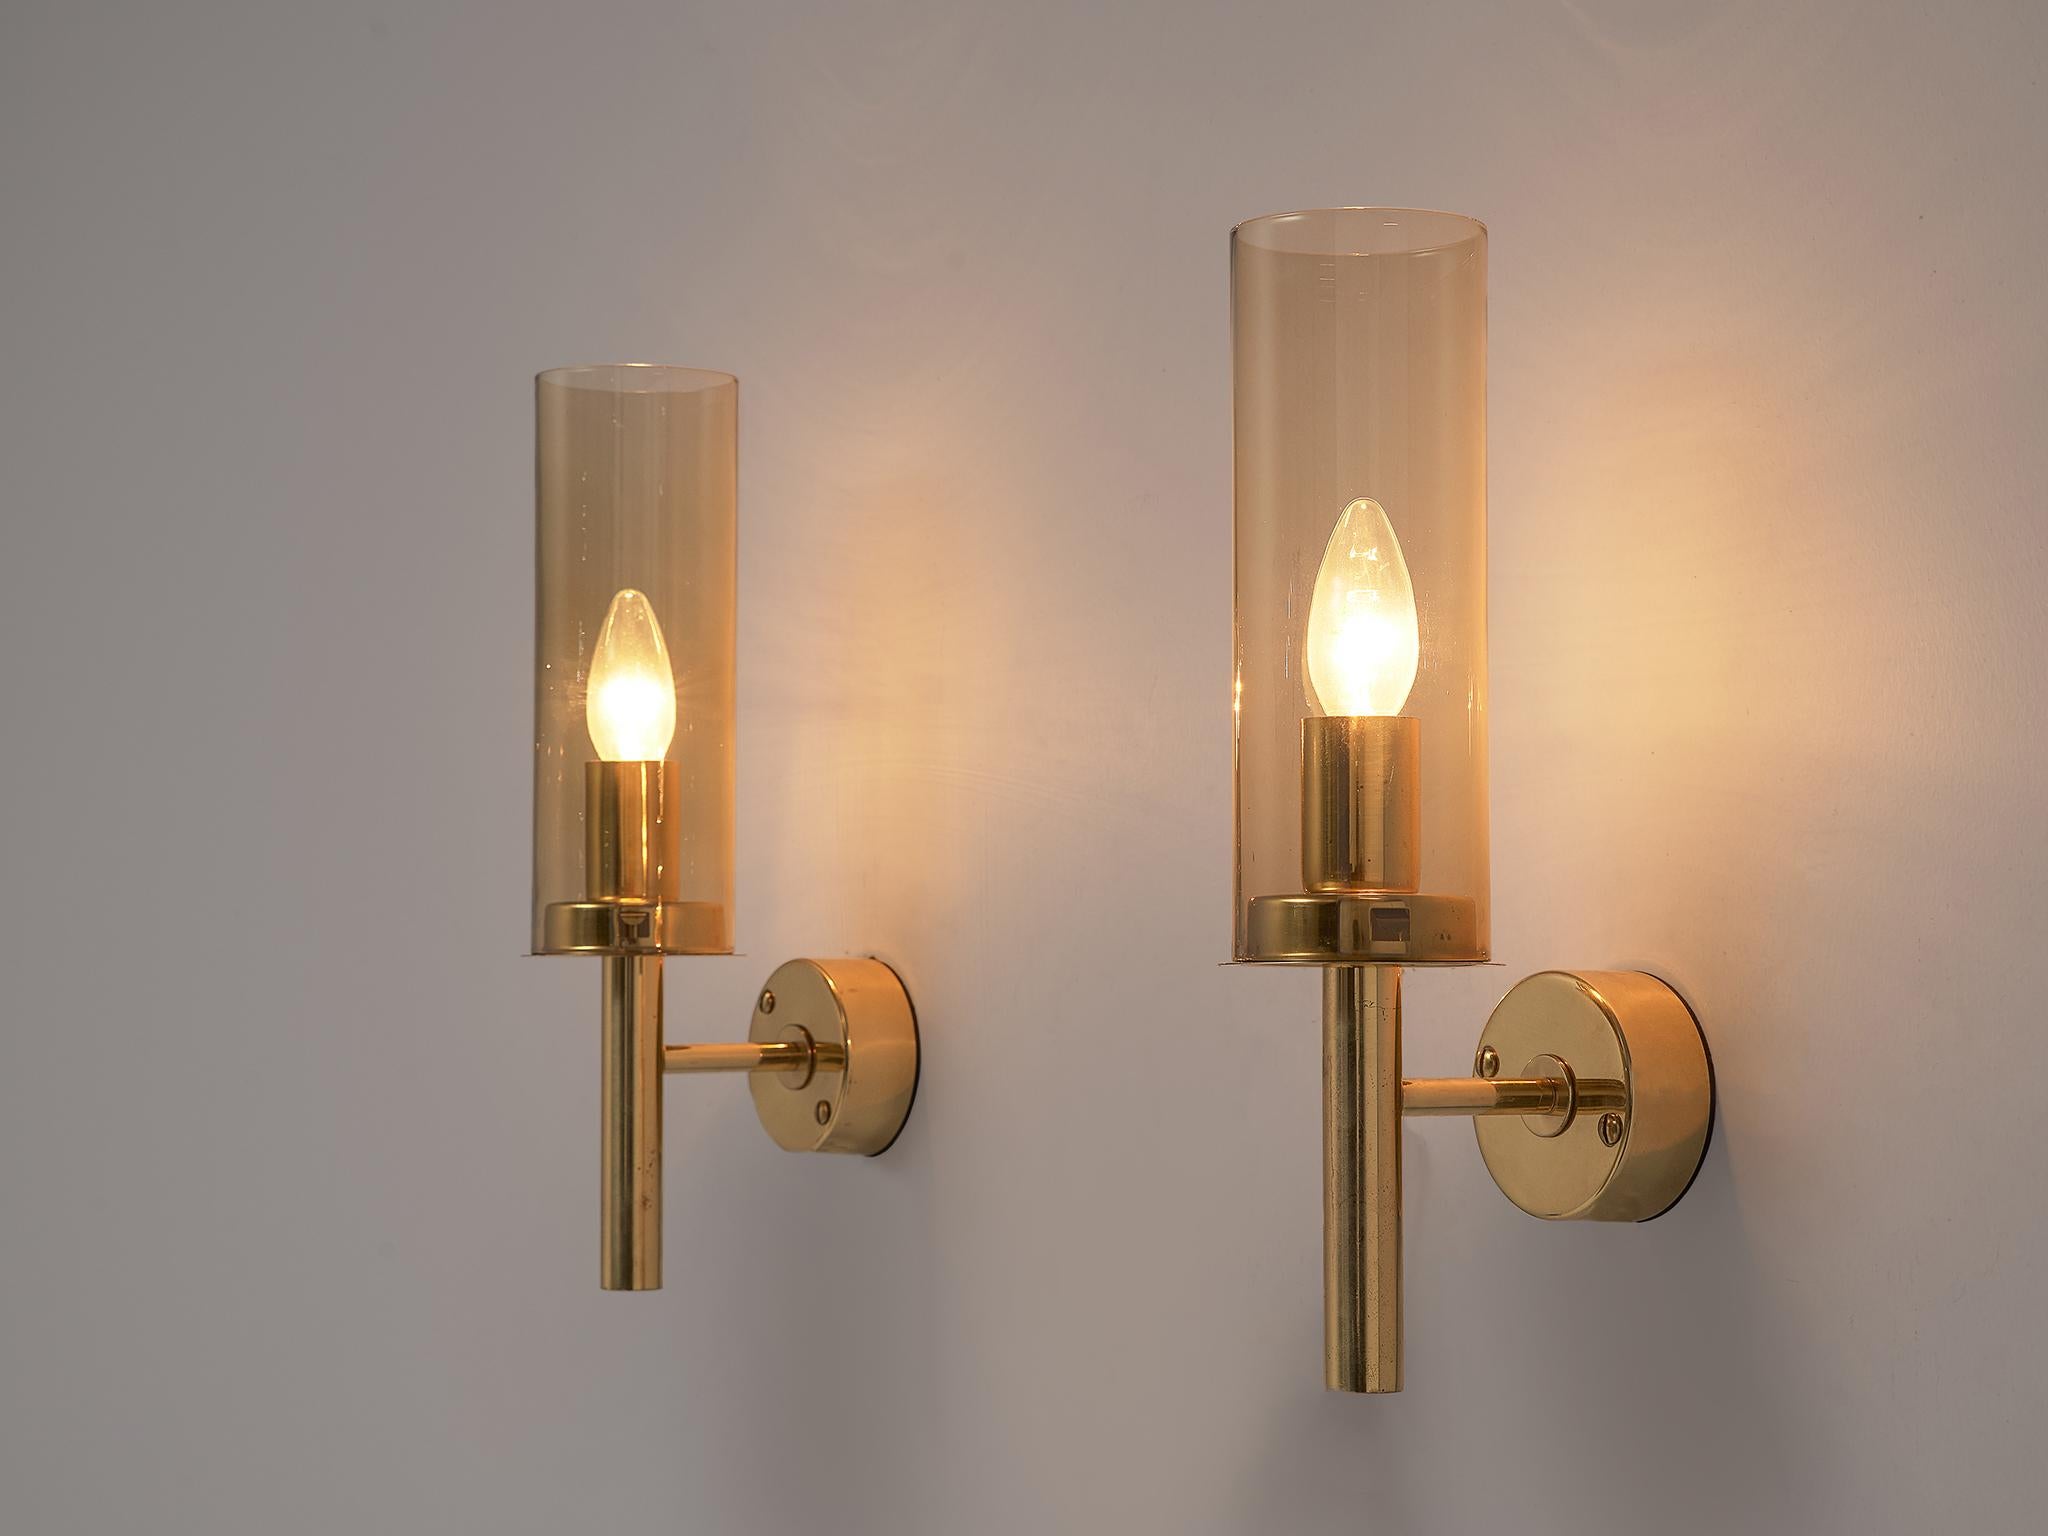 Hans-Agne Jakobsson, pair of wall lights model V-169, brass and glass, Sweden, 1960s.

This set of two brass and glass wall lamps, model V-169 from the 'Sonata' collection, was designed by Hans-Agne Jakobsson in Sweden during the 1960s.
These